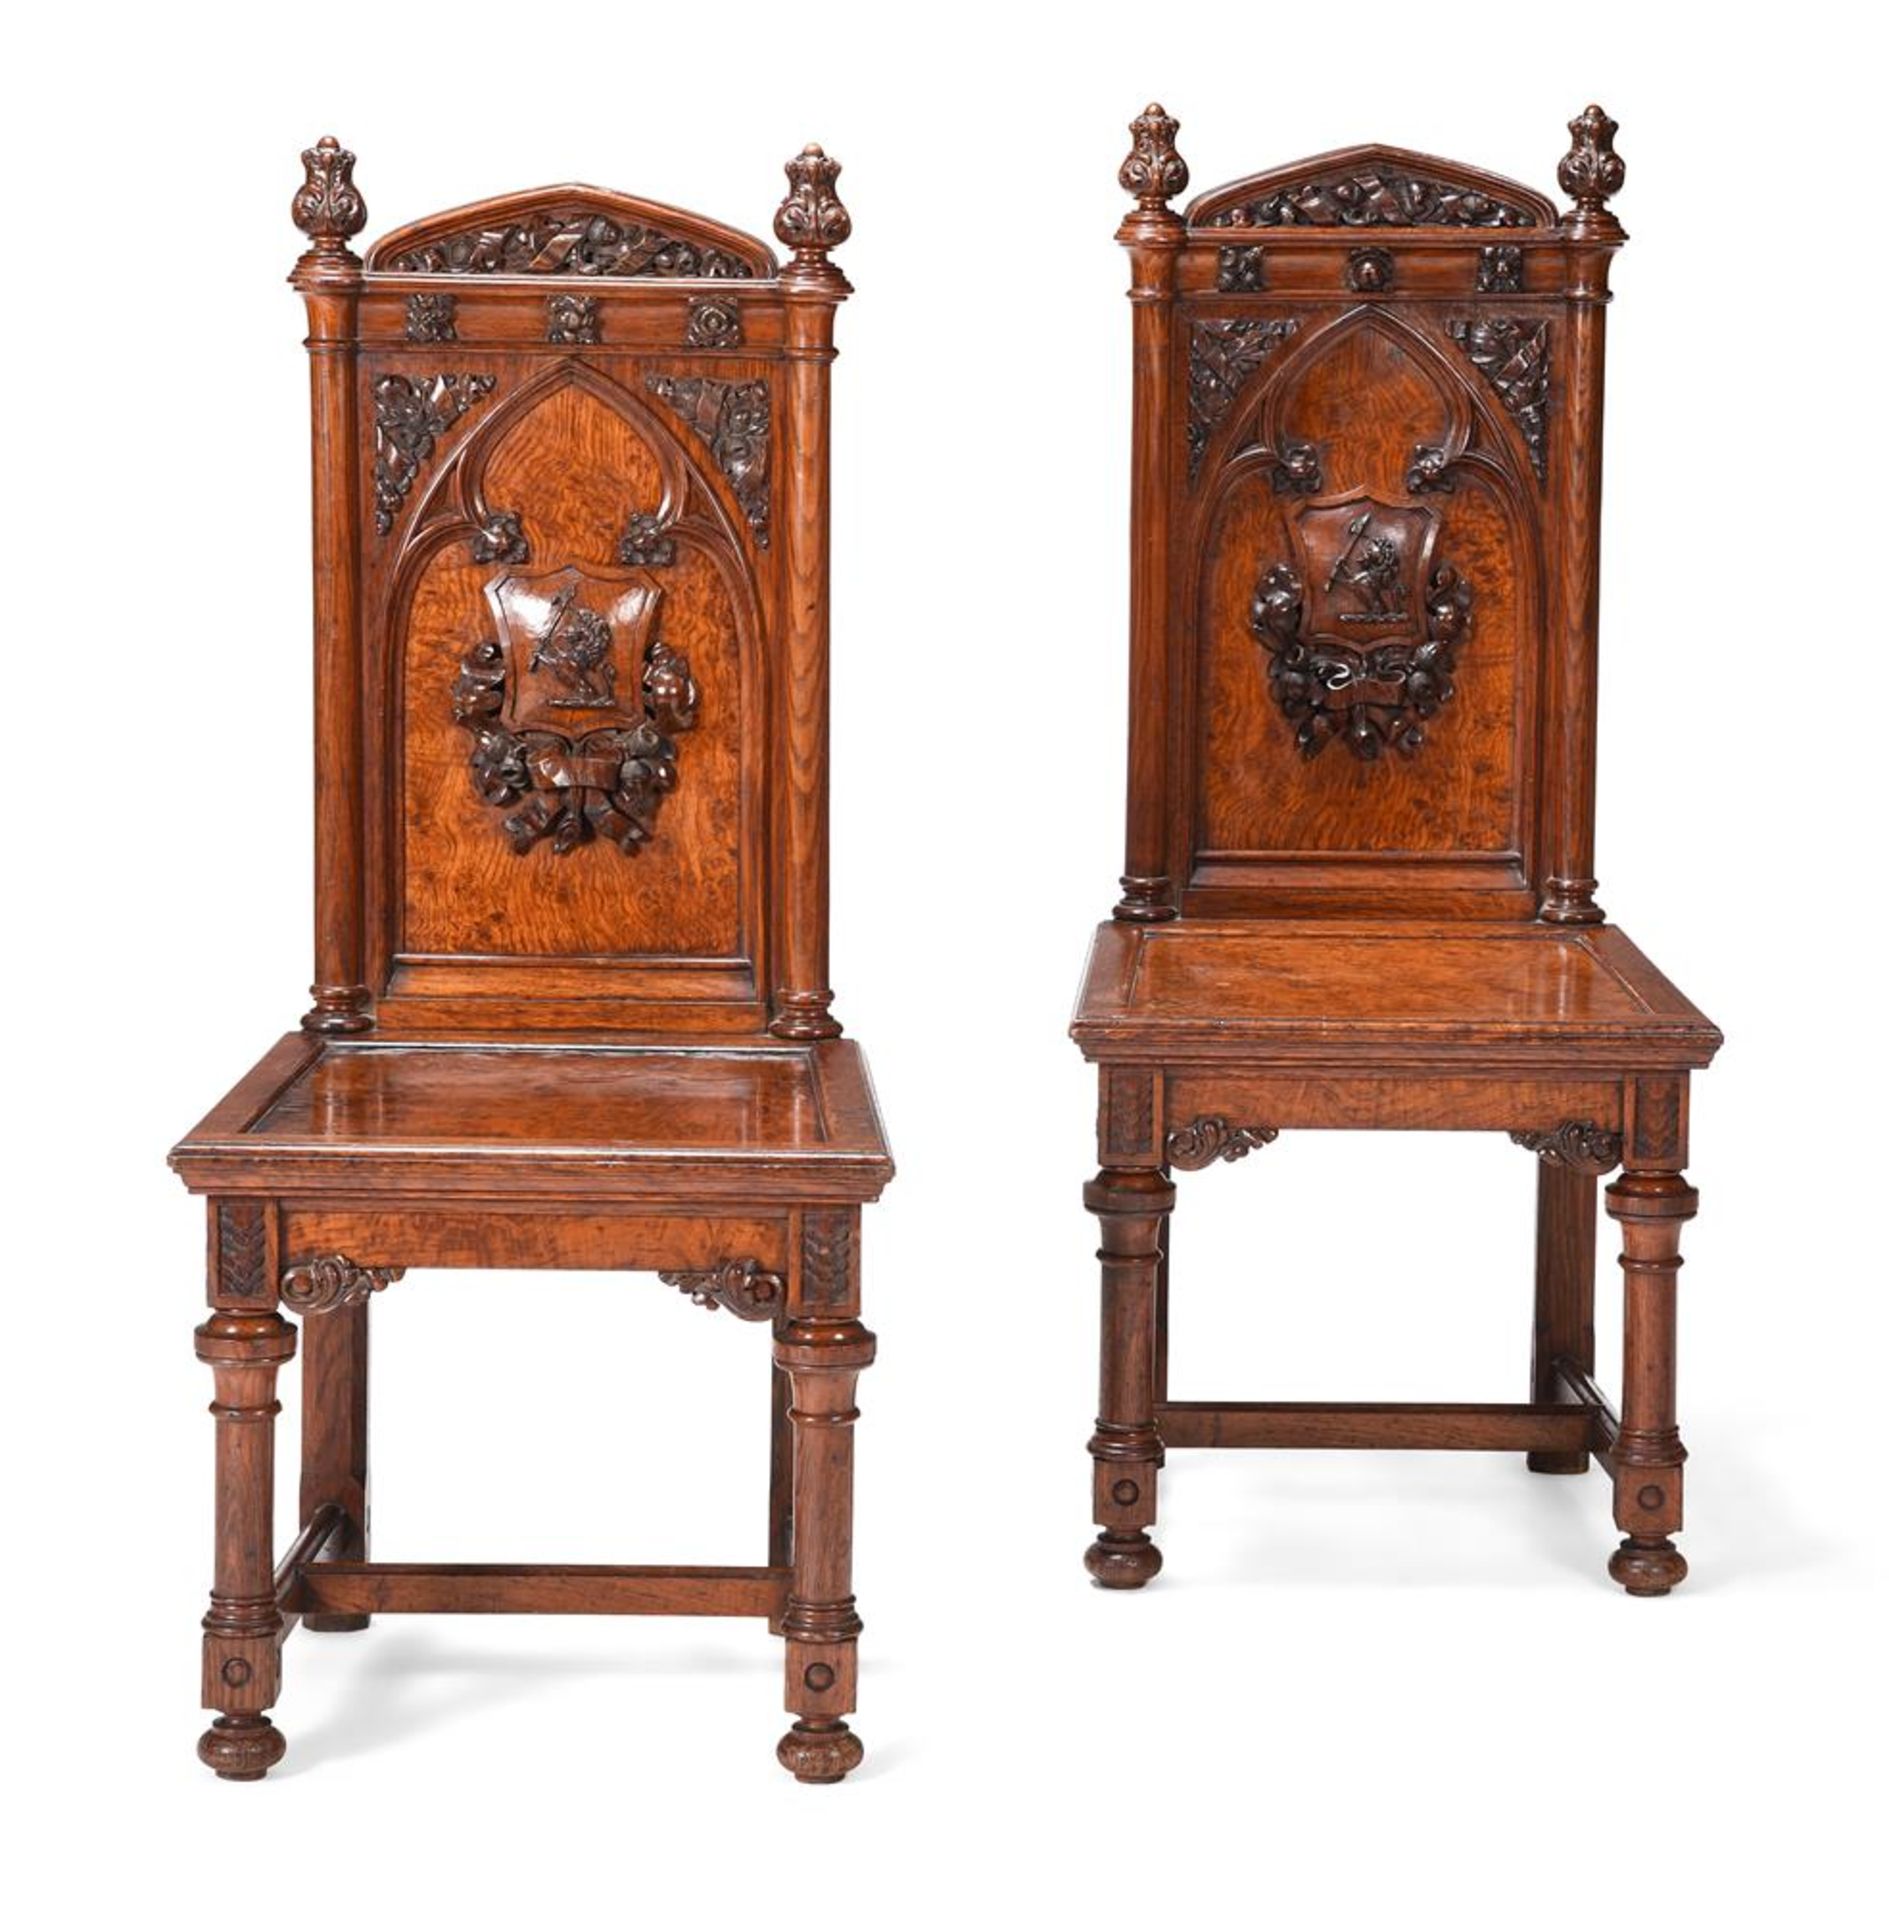 A PAIR OF VICTORIAN FIGURED OAK AND BURR OAK HALL CHAIRS, SECOND HALF 19TH CENTURY - Image 2 of 6